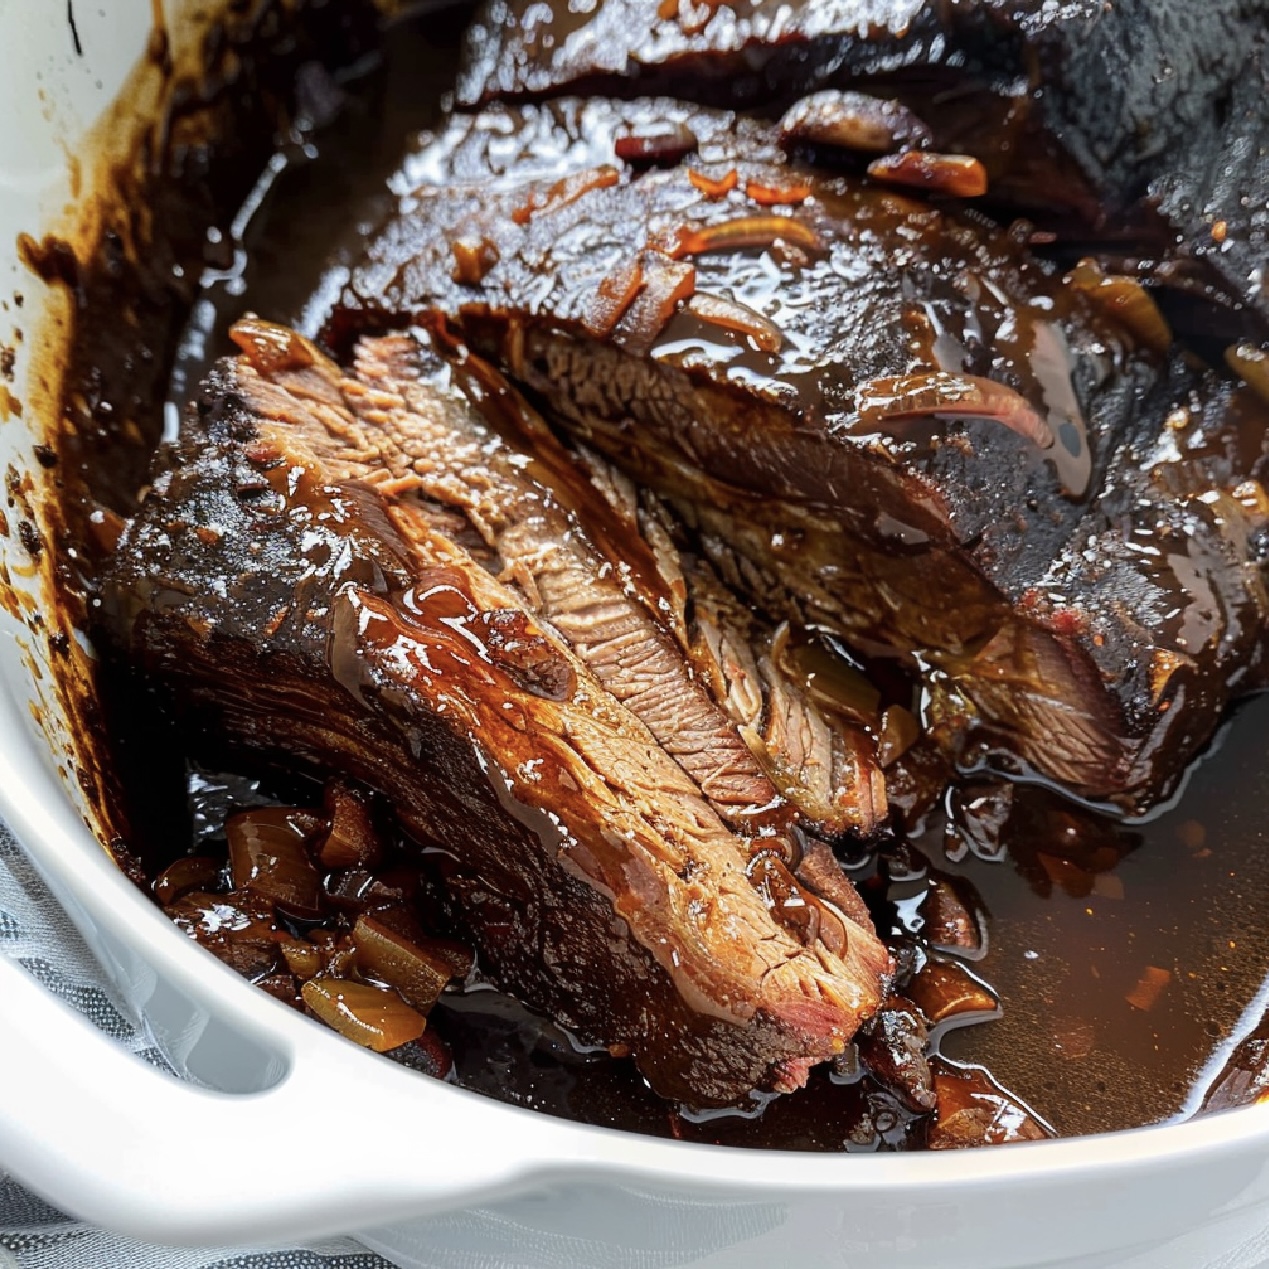 Achieve gourmet flavors with minimal effort using this slow cooker beef brisket recipe. Pin it now for a go-to meal that's both delicious and easy to prepare.